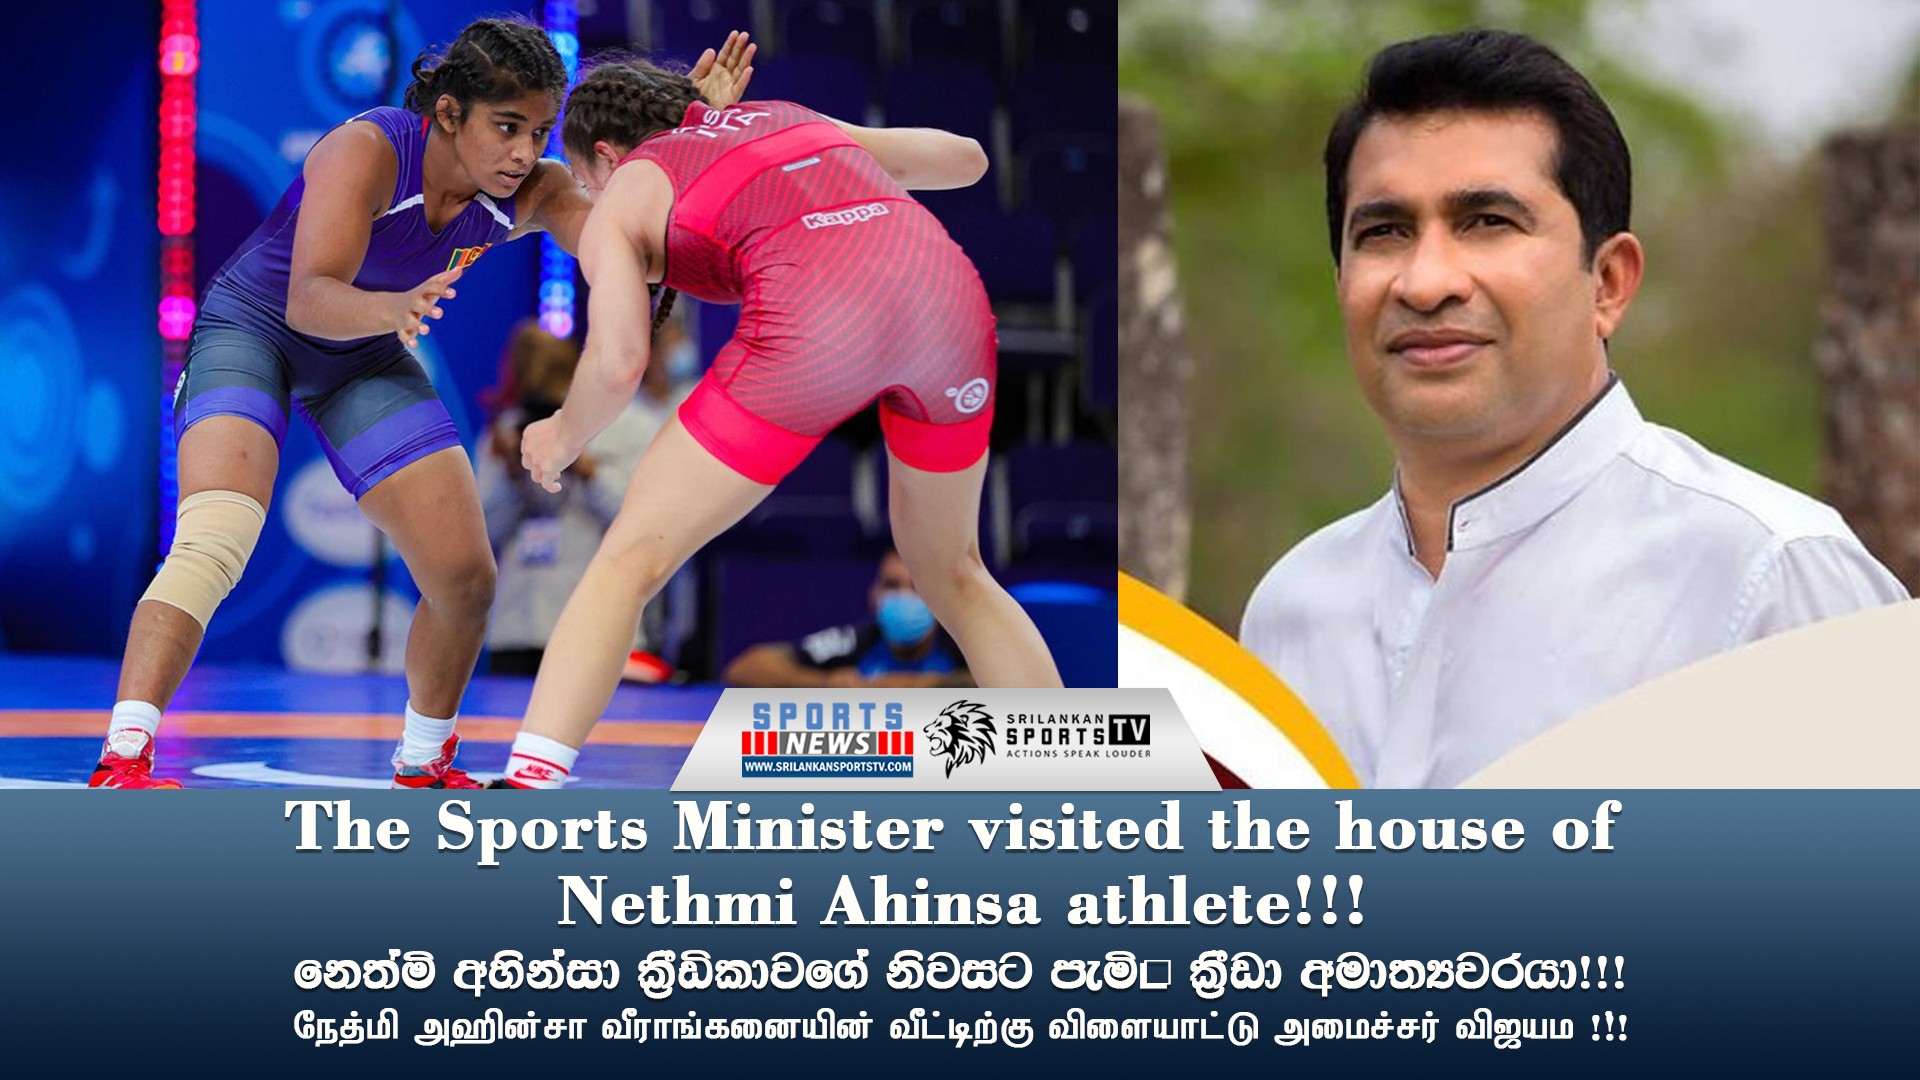 The sports minister visited the house of Nethmi Ahinsa athlete!!!